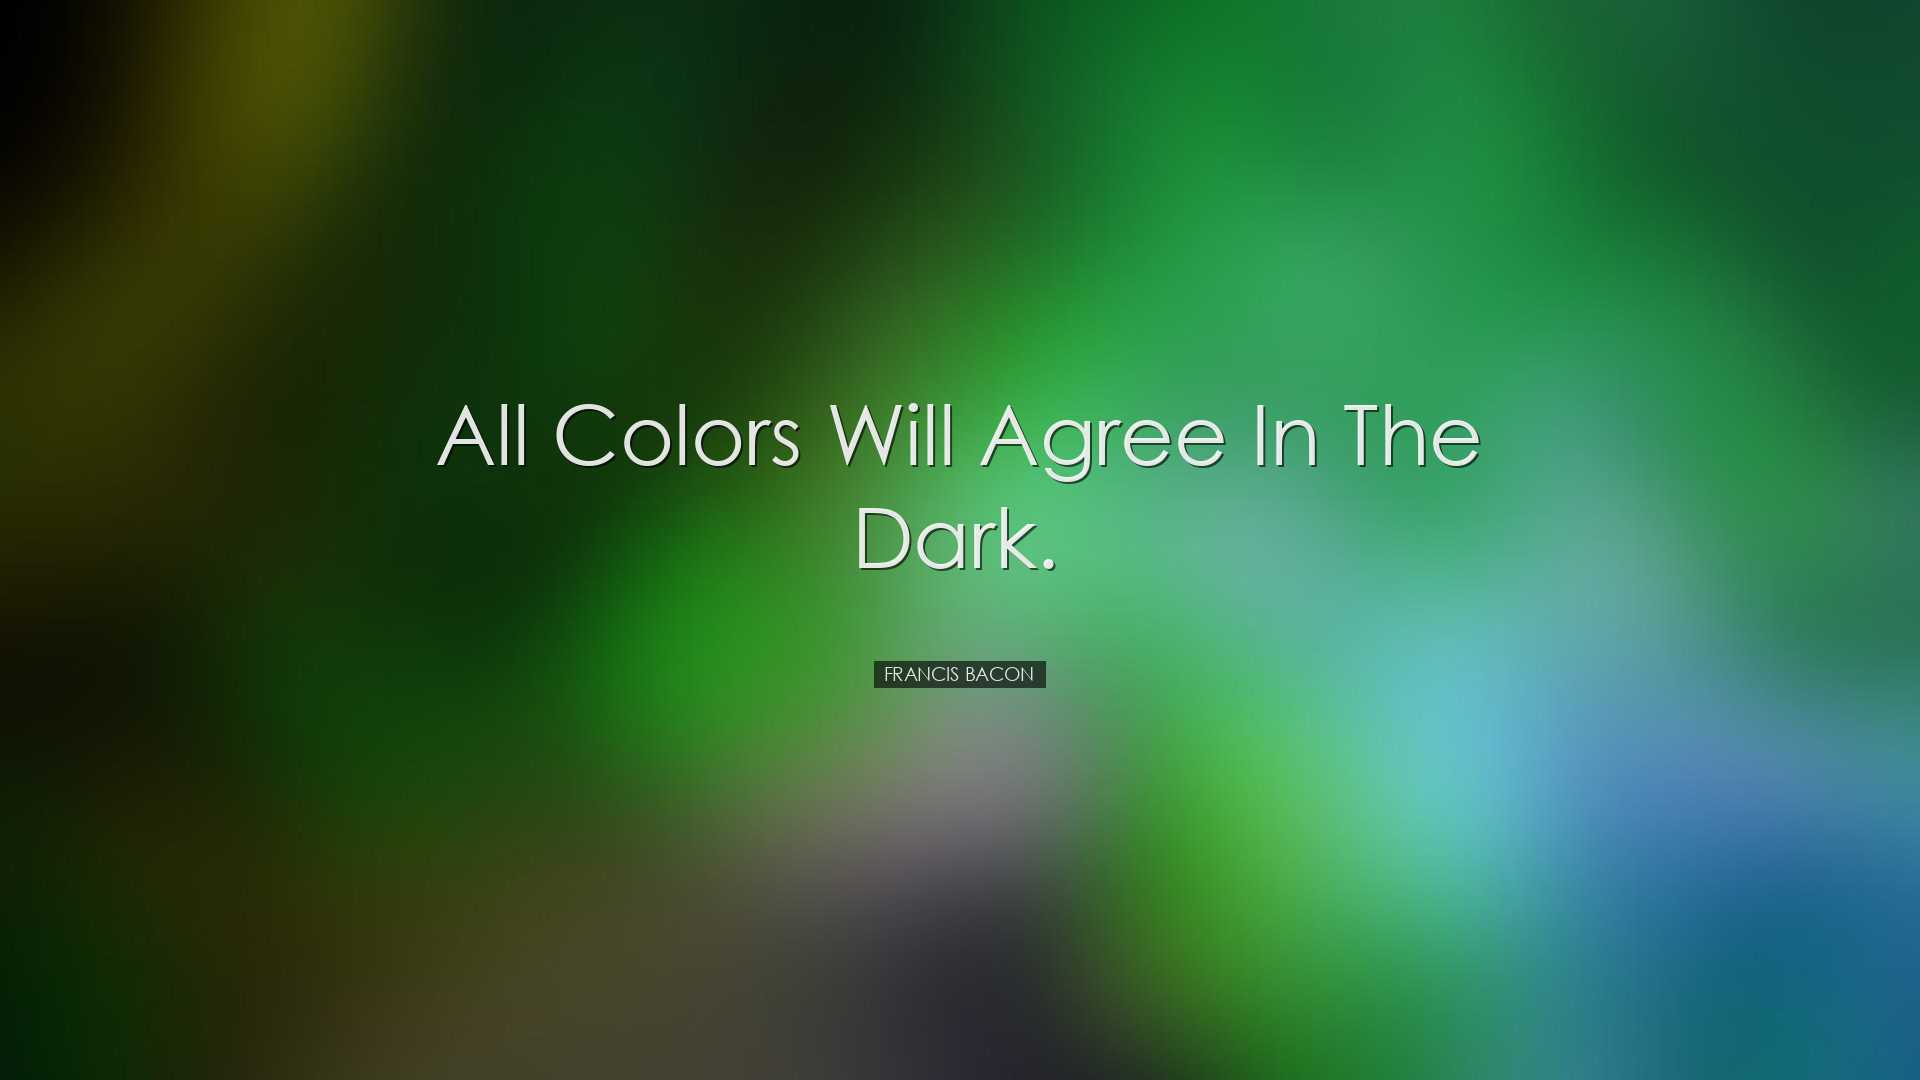 All colors will agree in the dark. - Francis Bacon